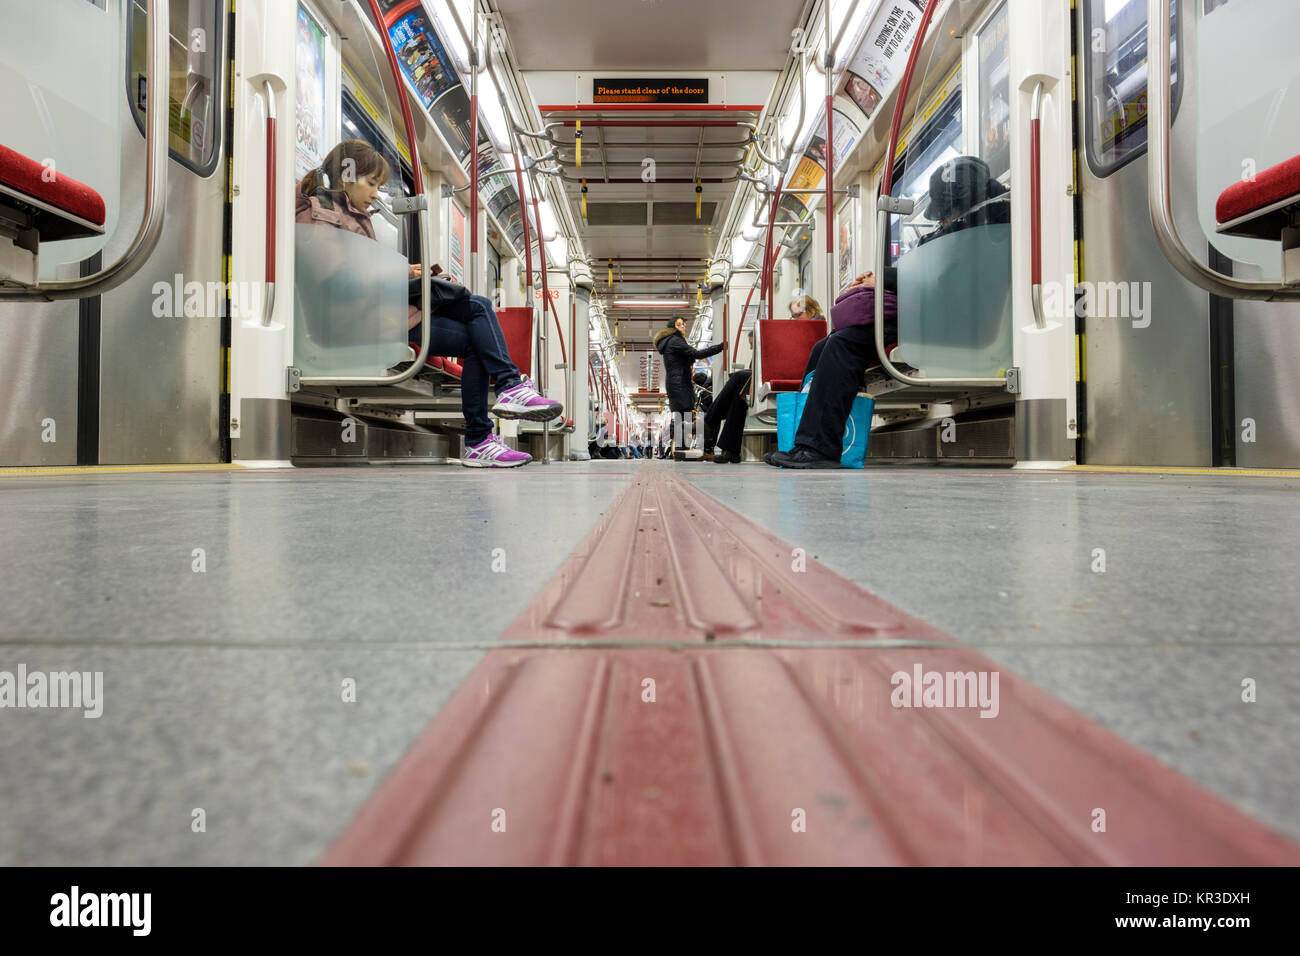 Worm's eye view of the interior of a Toronto Transit Commission (TTC) subway car and commuters, Canada. Stock Photo